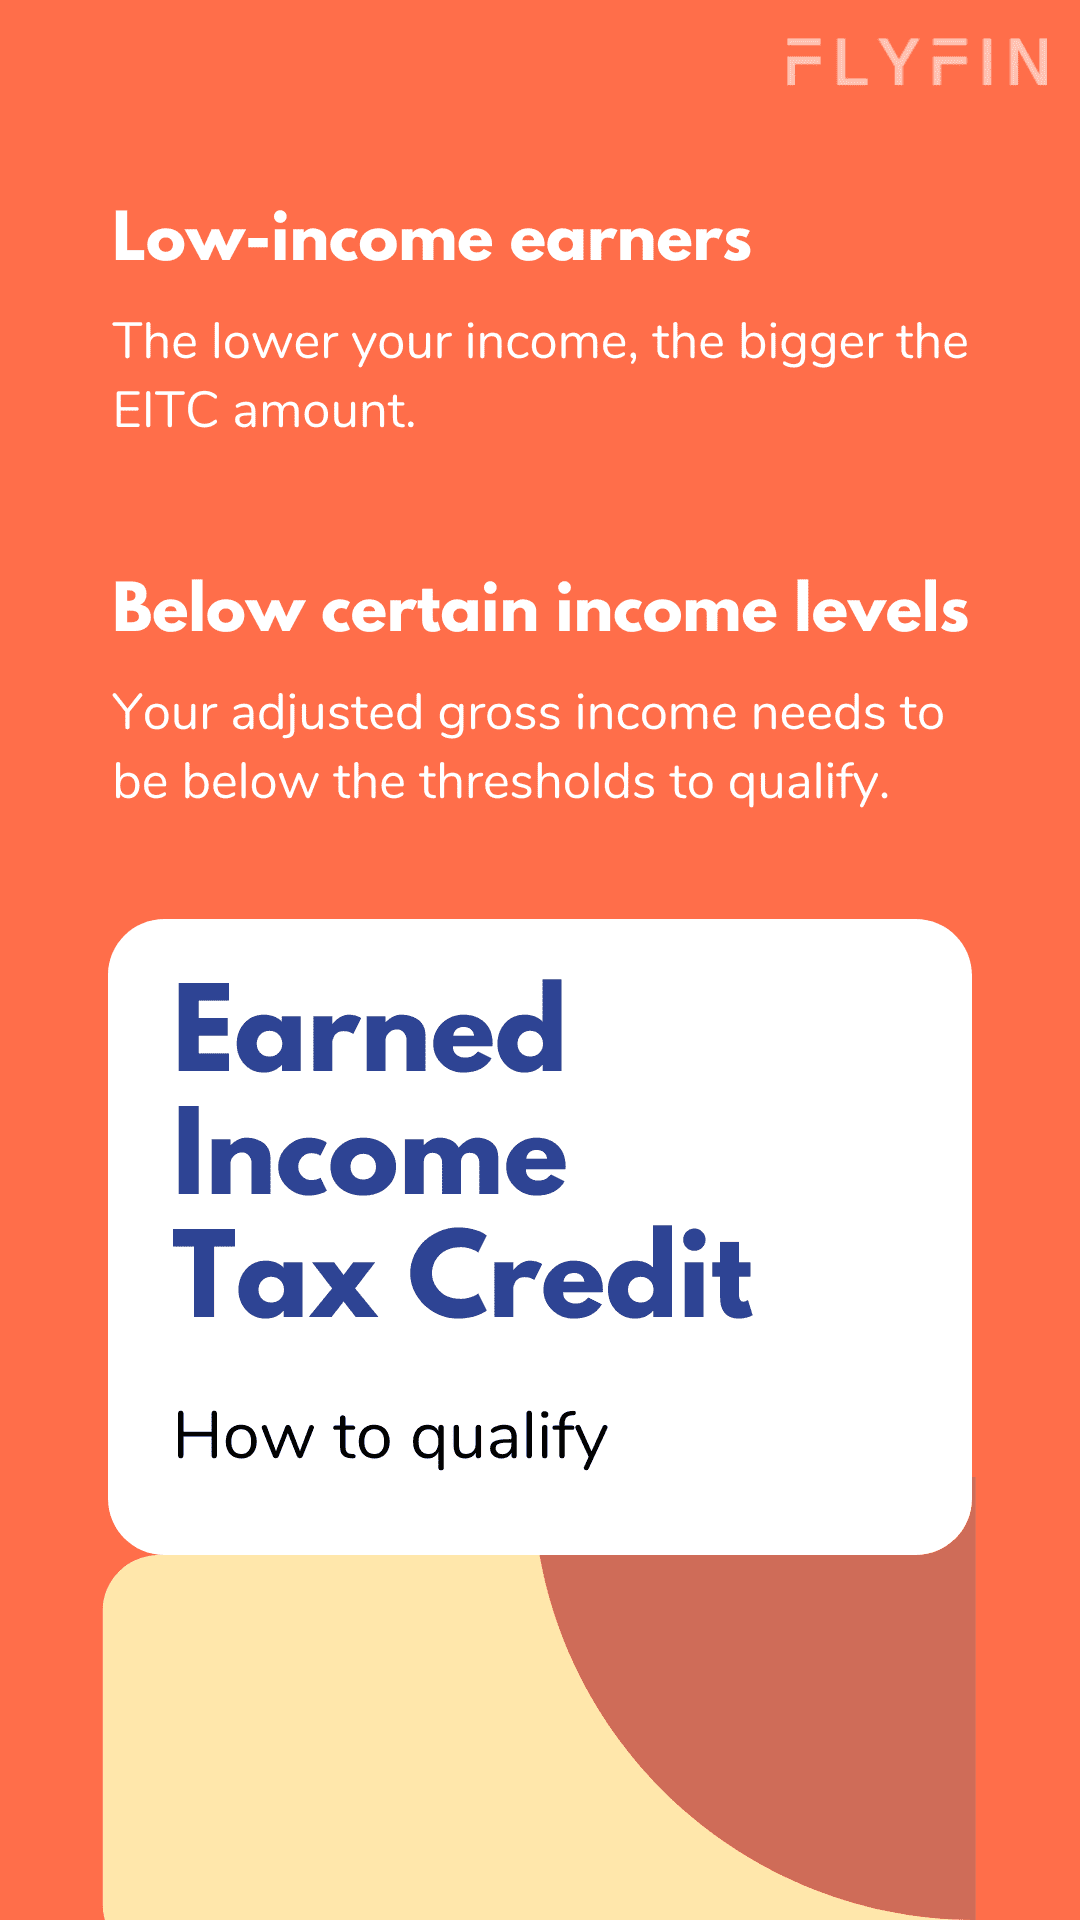 Image about Earned Income Tax Credit (EITC) for low-income earners. Income thresholds apply. Relevant for those who file taxes and earn wages or salaries.